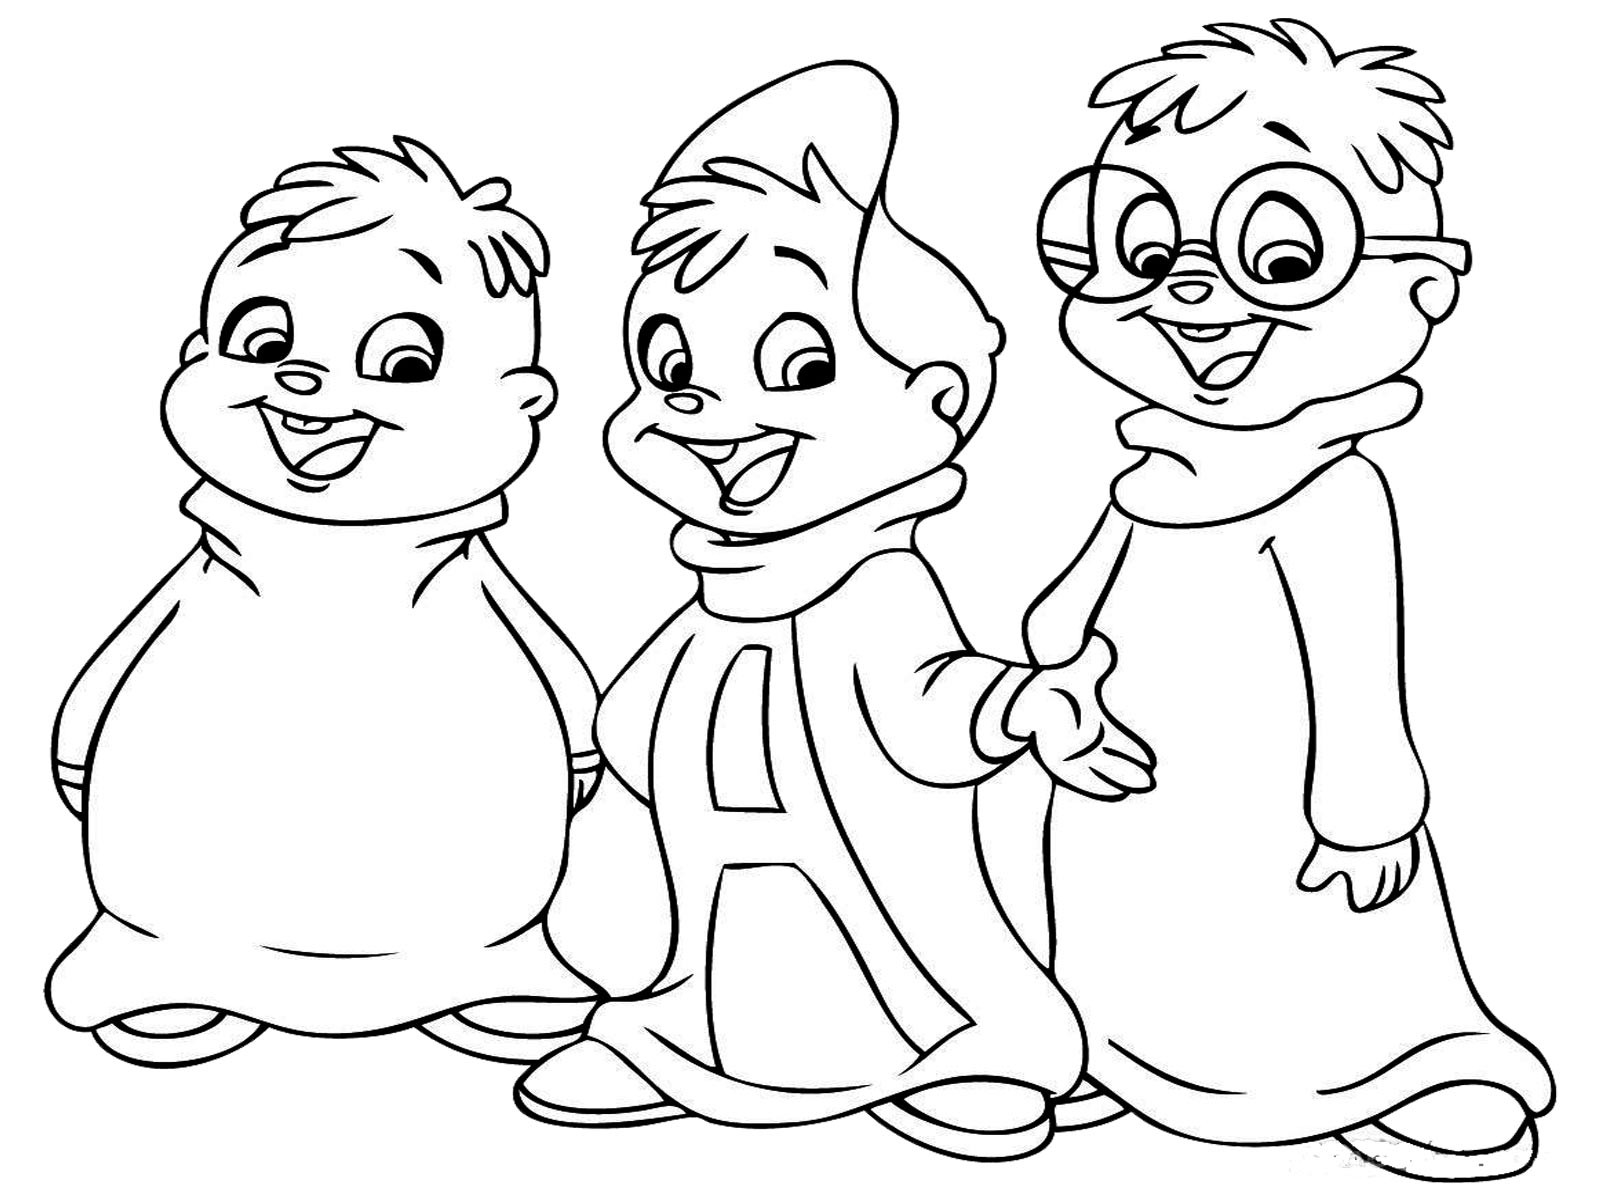 Coloring Pages For Boys To Print
 Coloring Pages for Boys 2018 Dr Odd